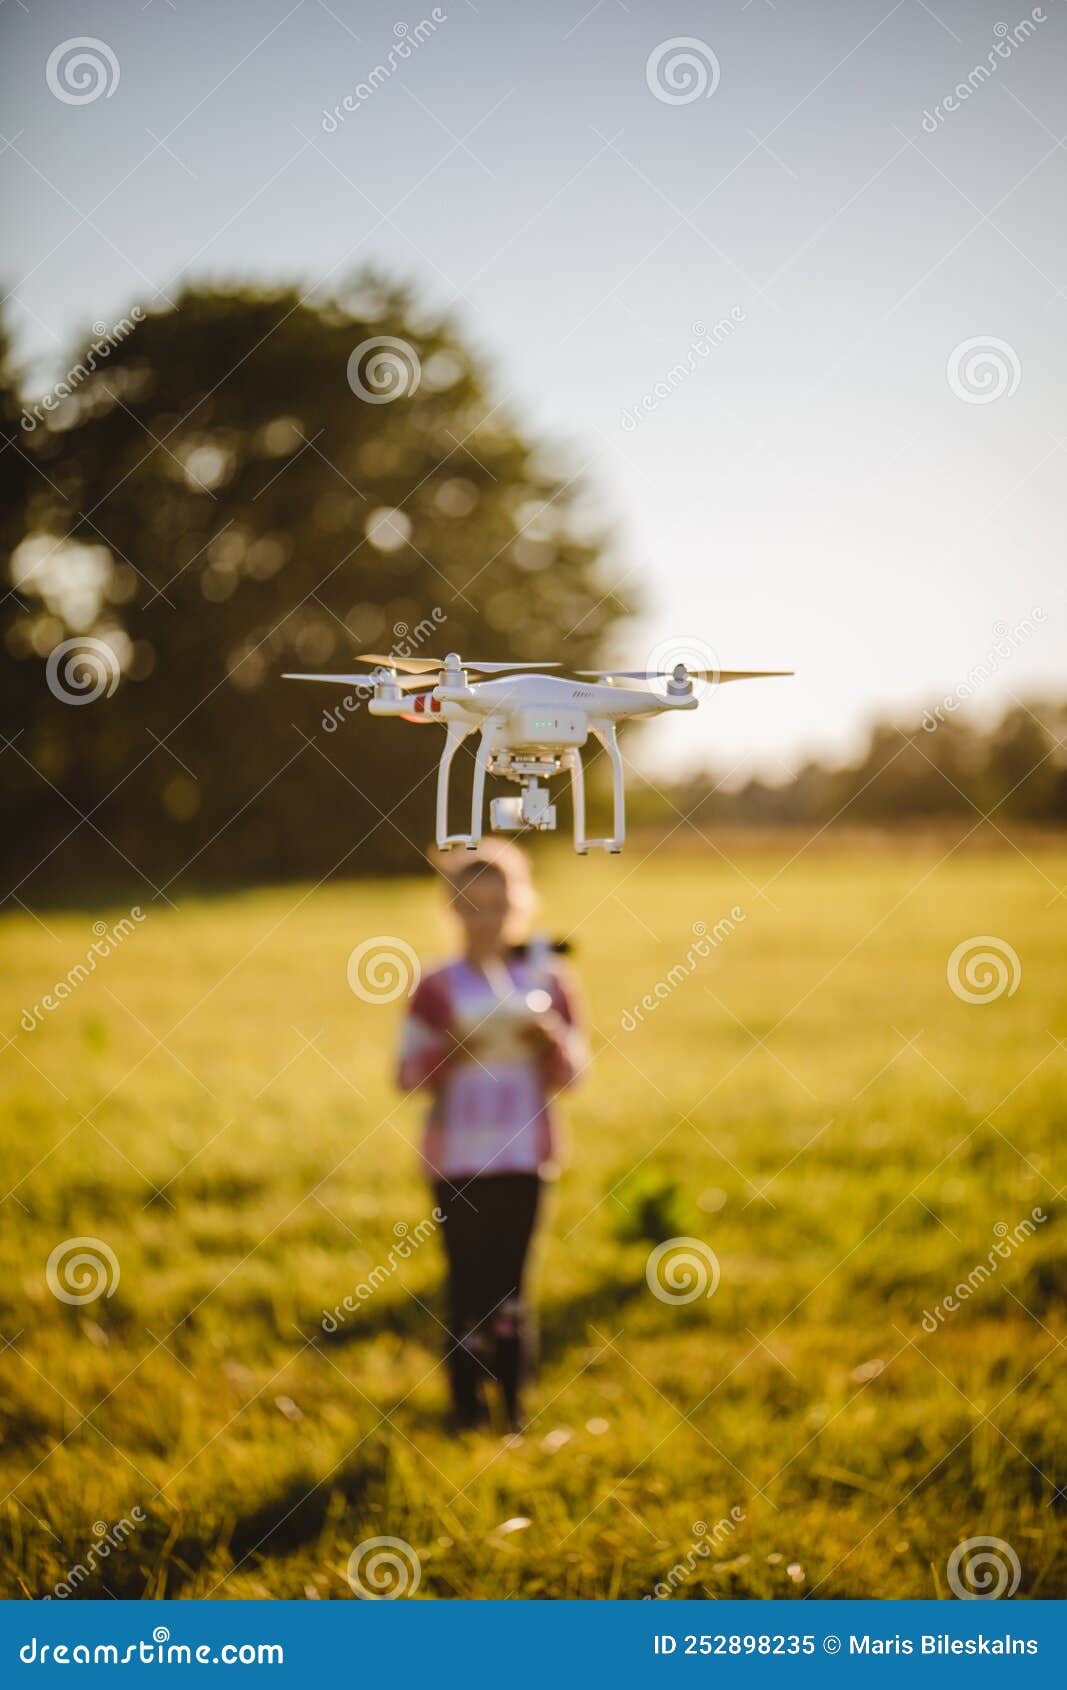 kid with dron in summer